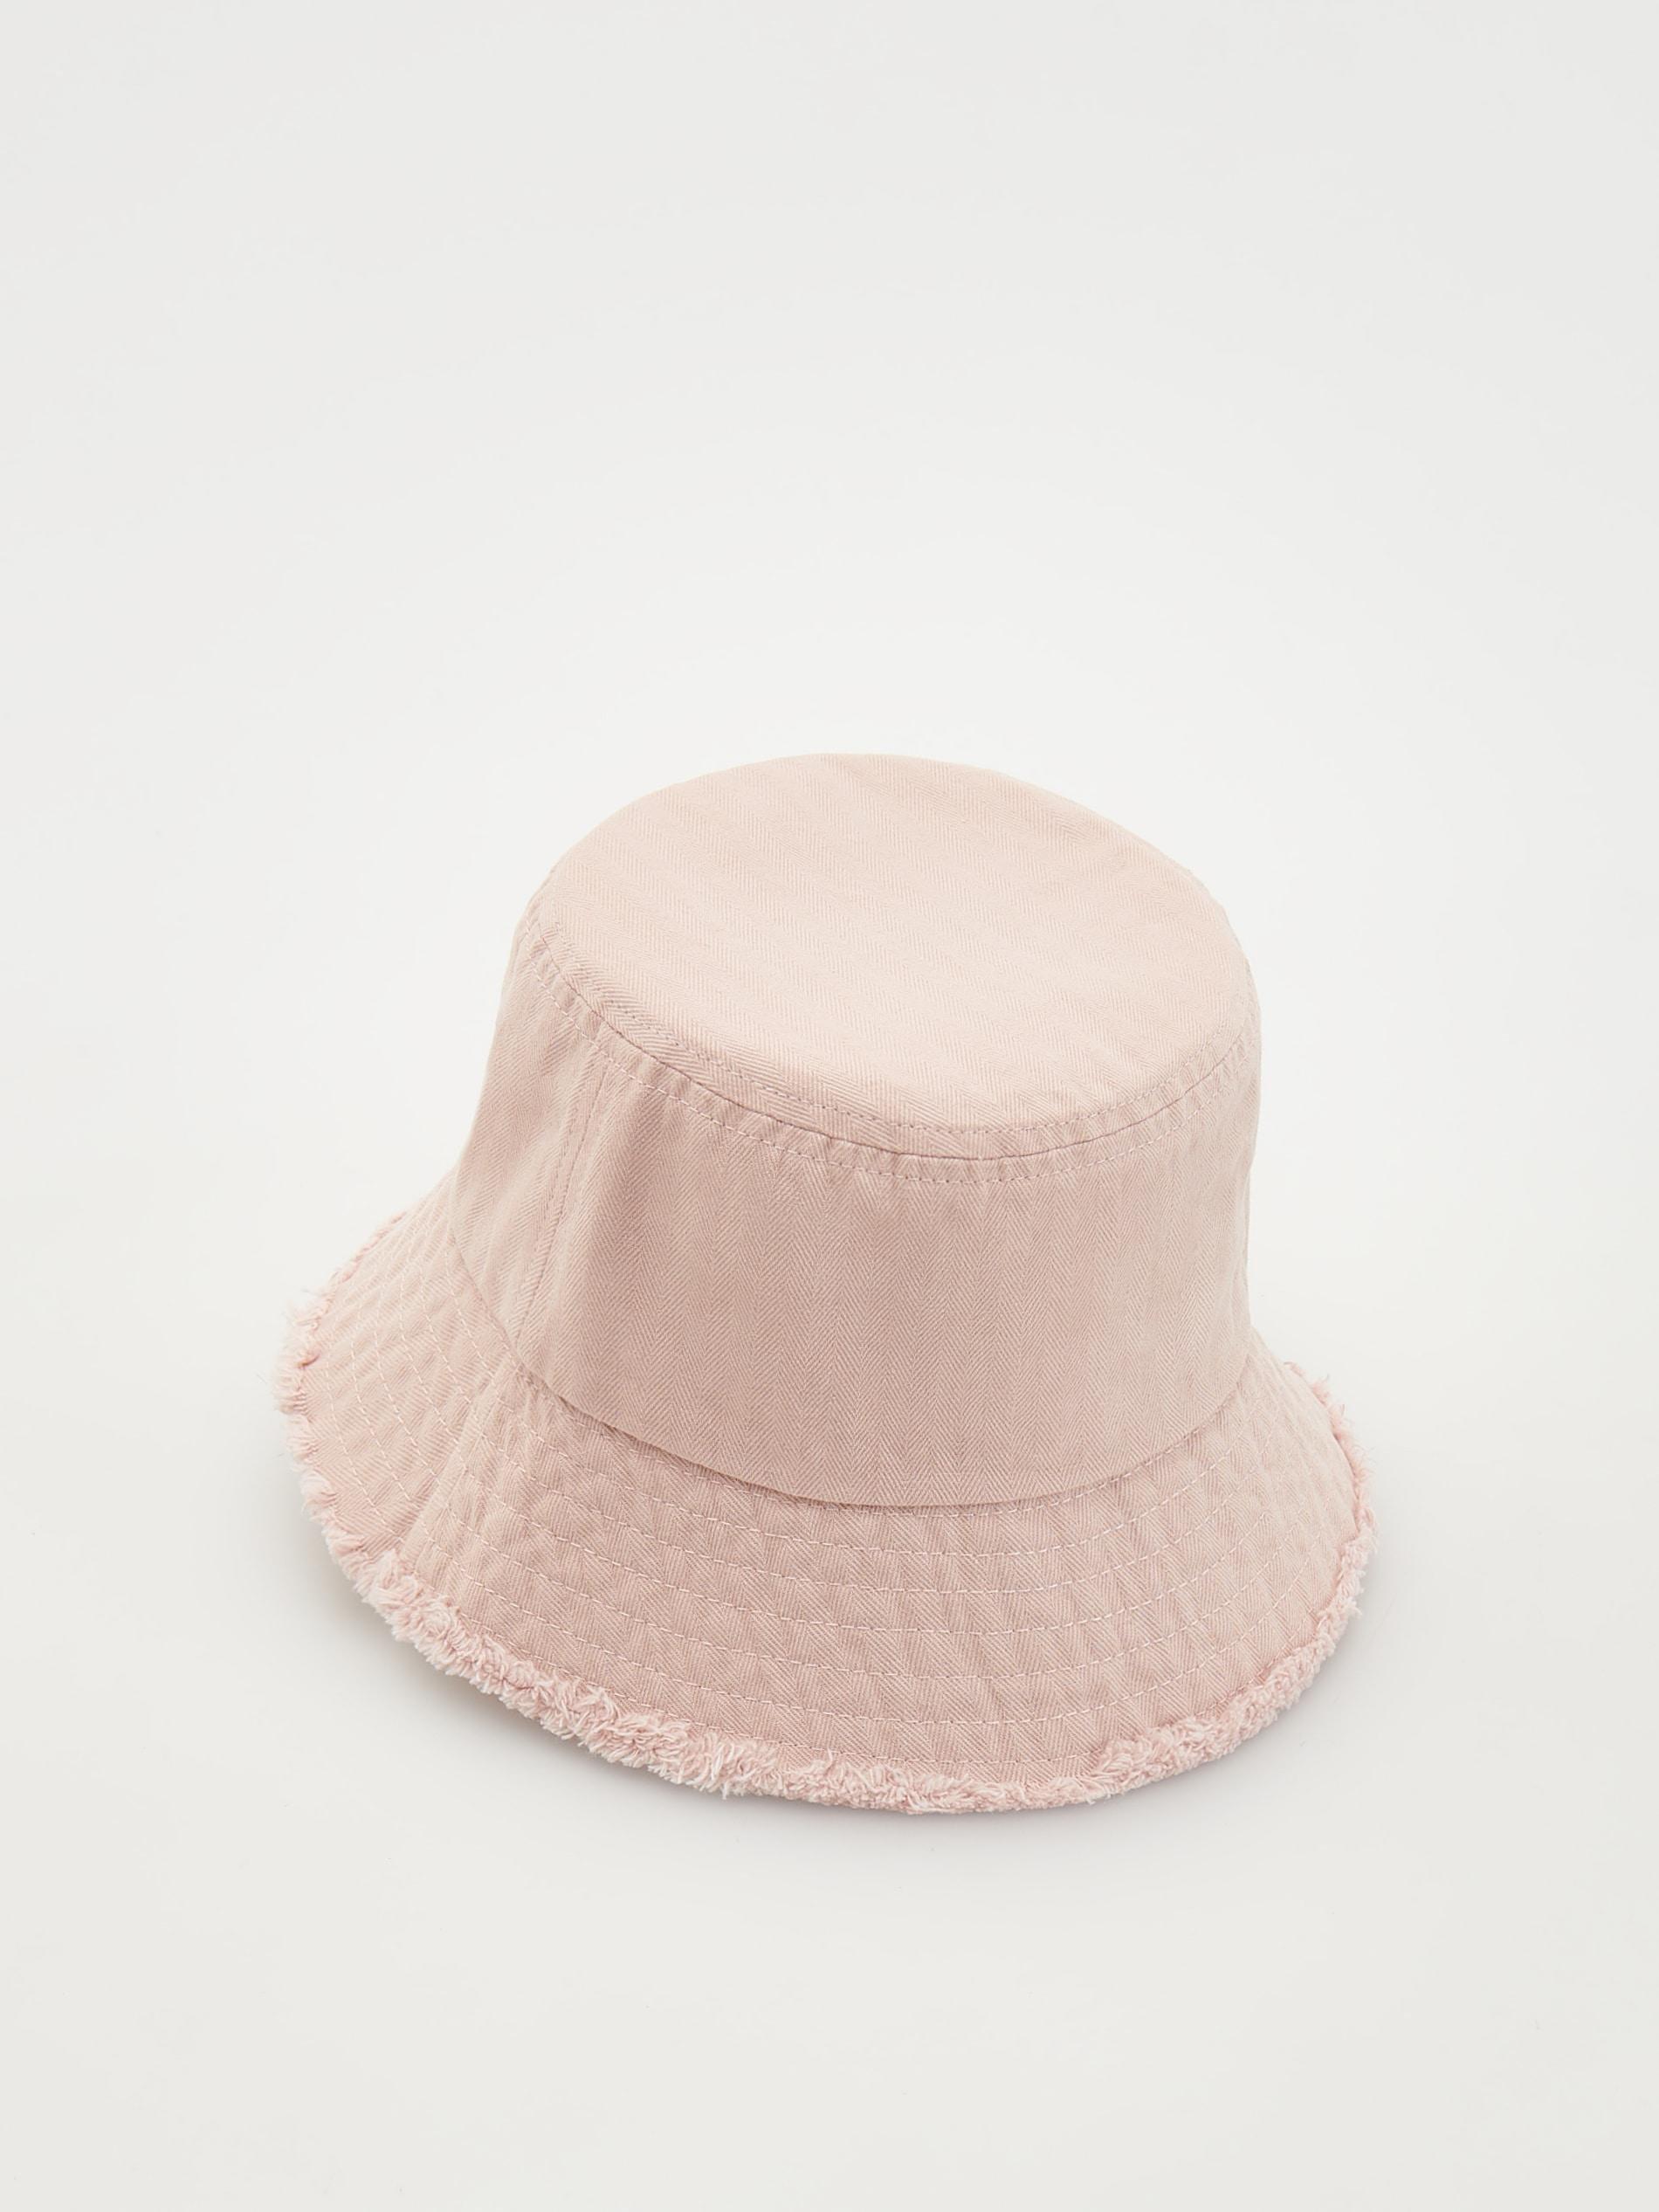 Reserved - White Bucket Hat